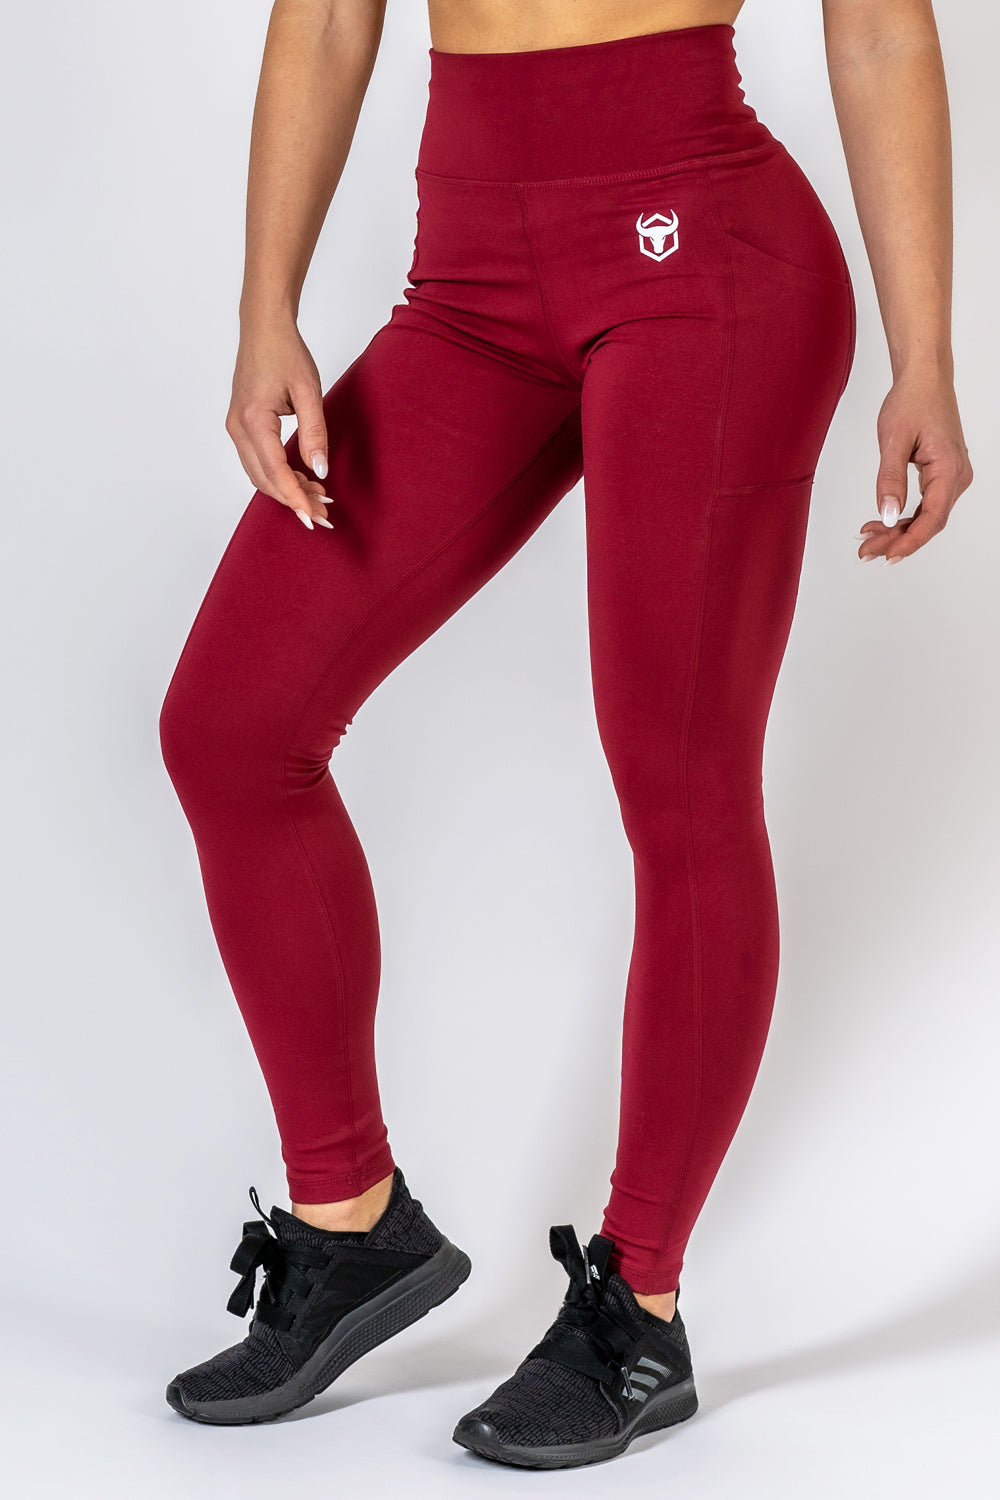 Diana Active Leggings – Iron and Stone Fitness